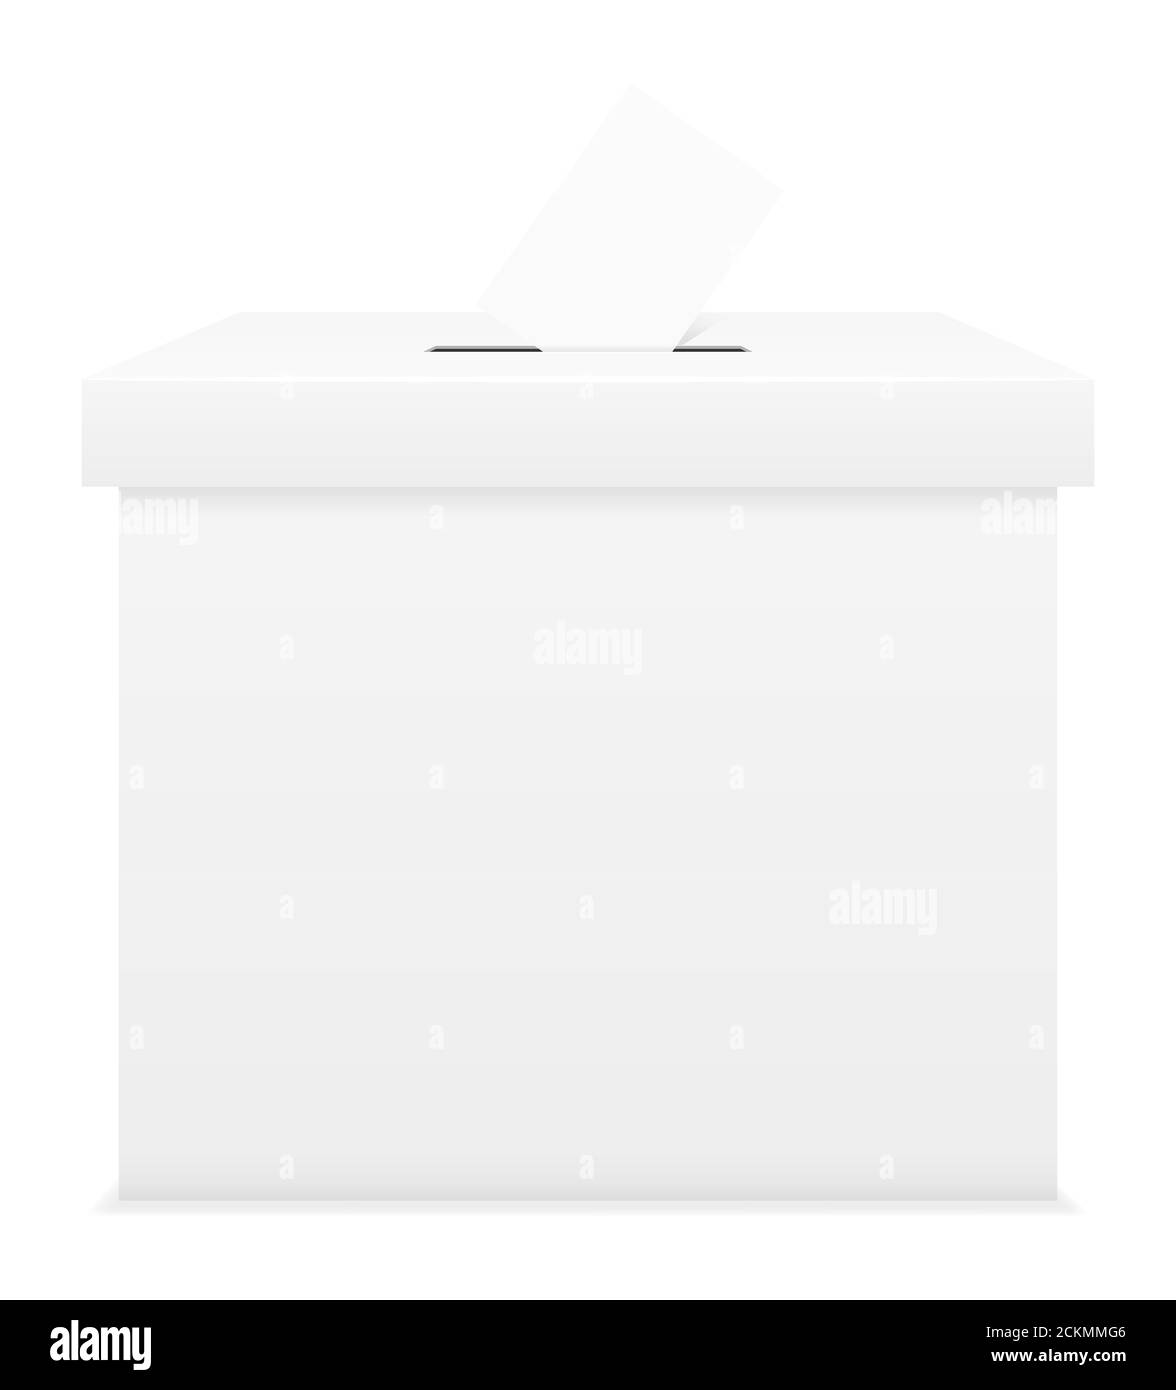 ballot box for election voting vector illustration isolated on white background Stock Photo